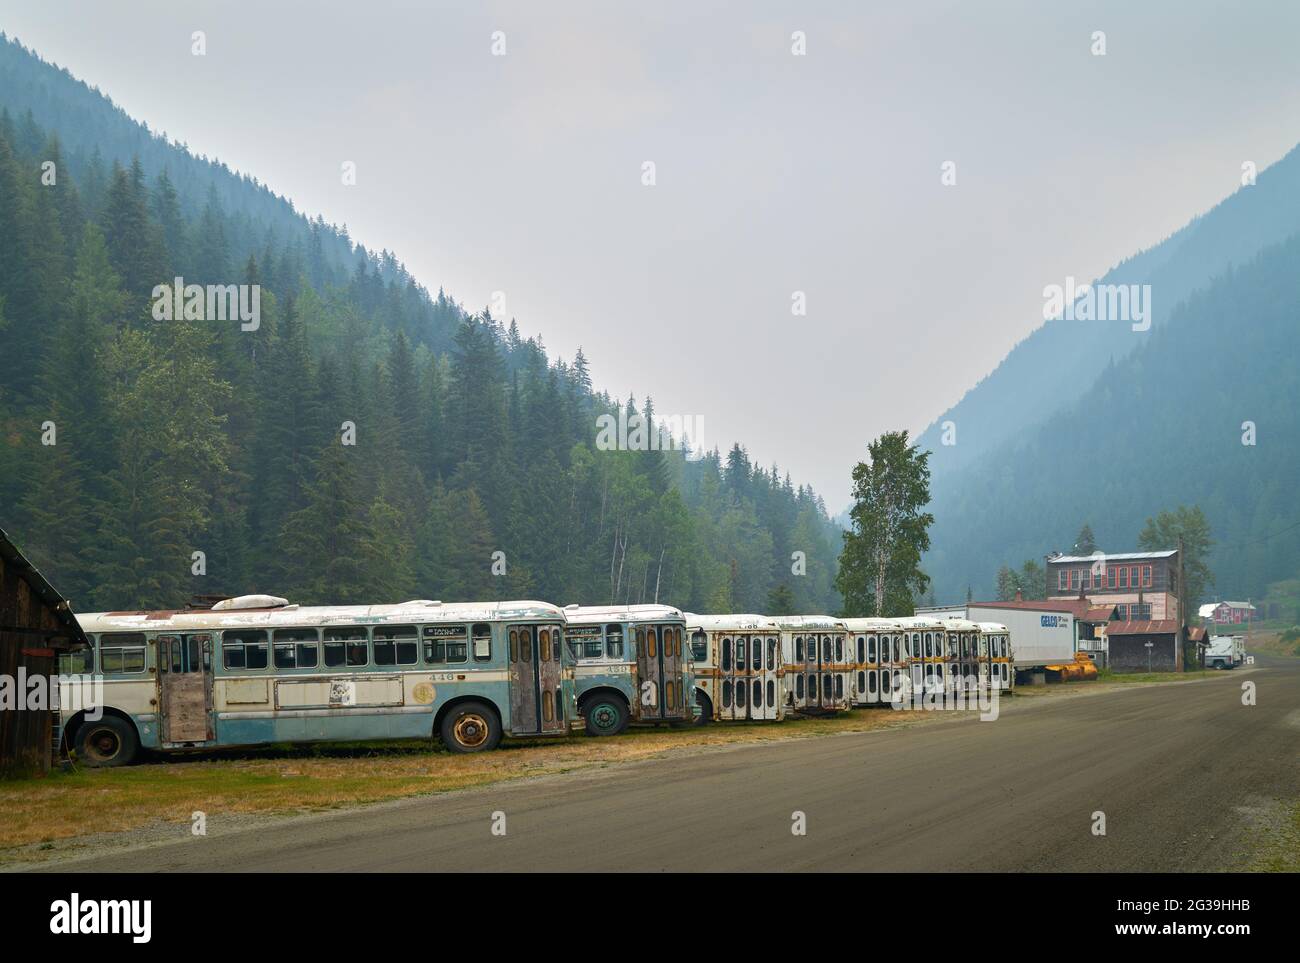 Sandon, British Columbia, Canada - August 24, 2018. Sandon Historic Buses. Old Vancouver buses parked in the Kootenay ghost town of Sandon, BC. Stock Photo